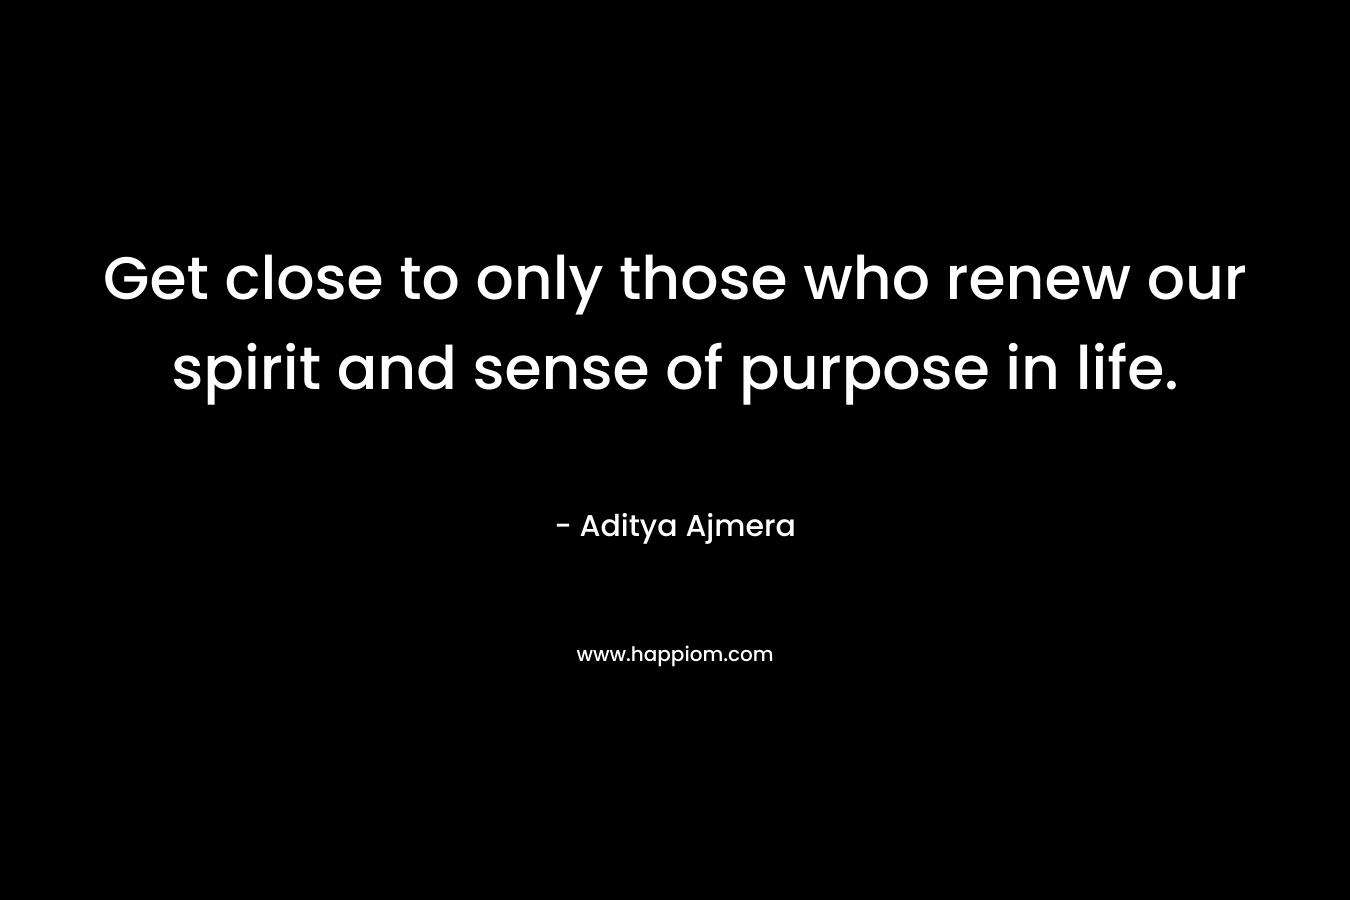 Get close to only those who renew our spirit and sense of purpose in life. – Aditya Ajmera